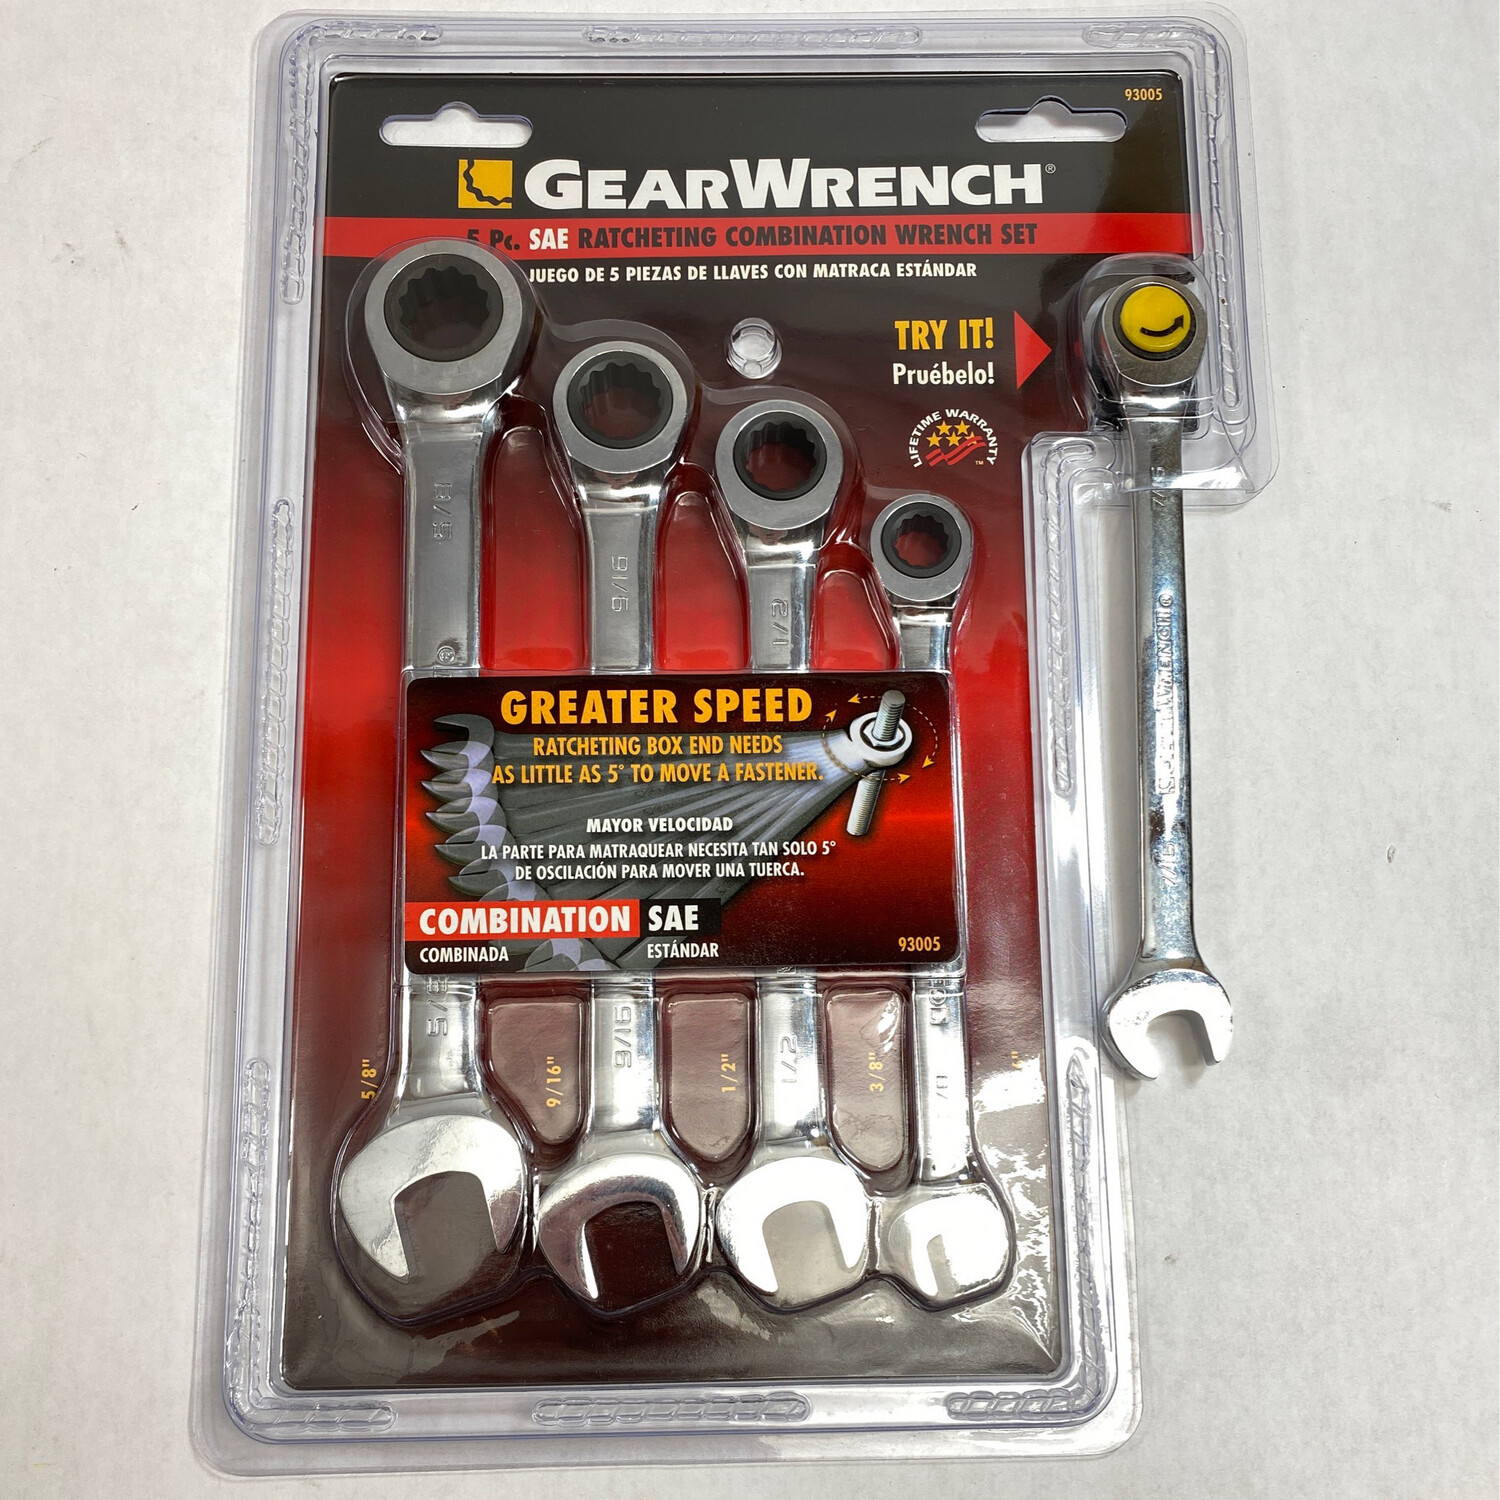 Gearwrench 5 Pc SAE Ratcheting Combination Wrench Set, 93005